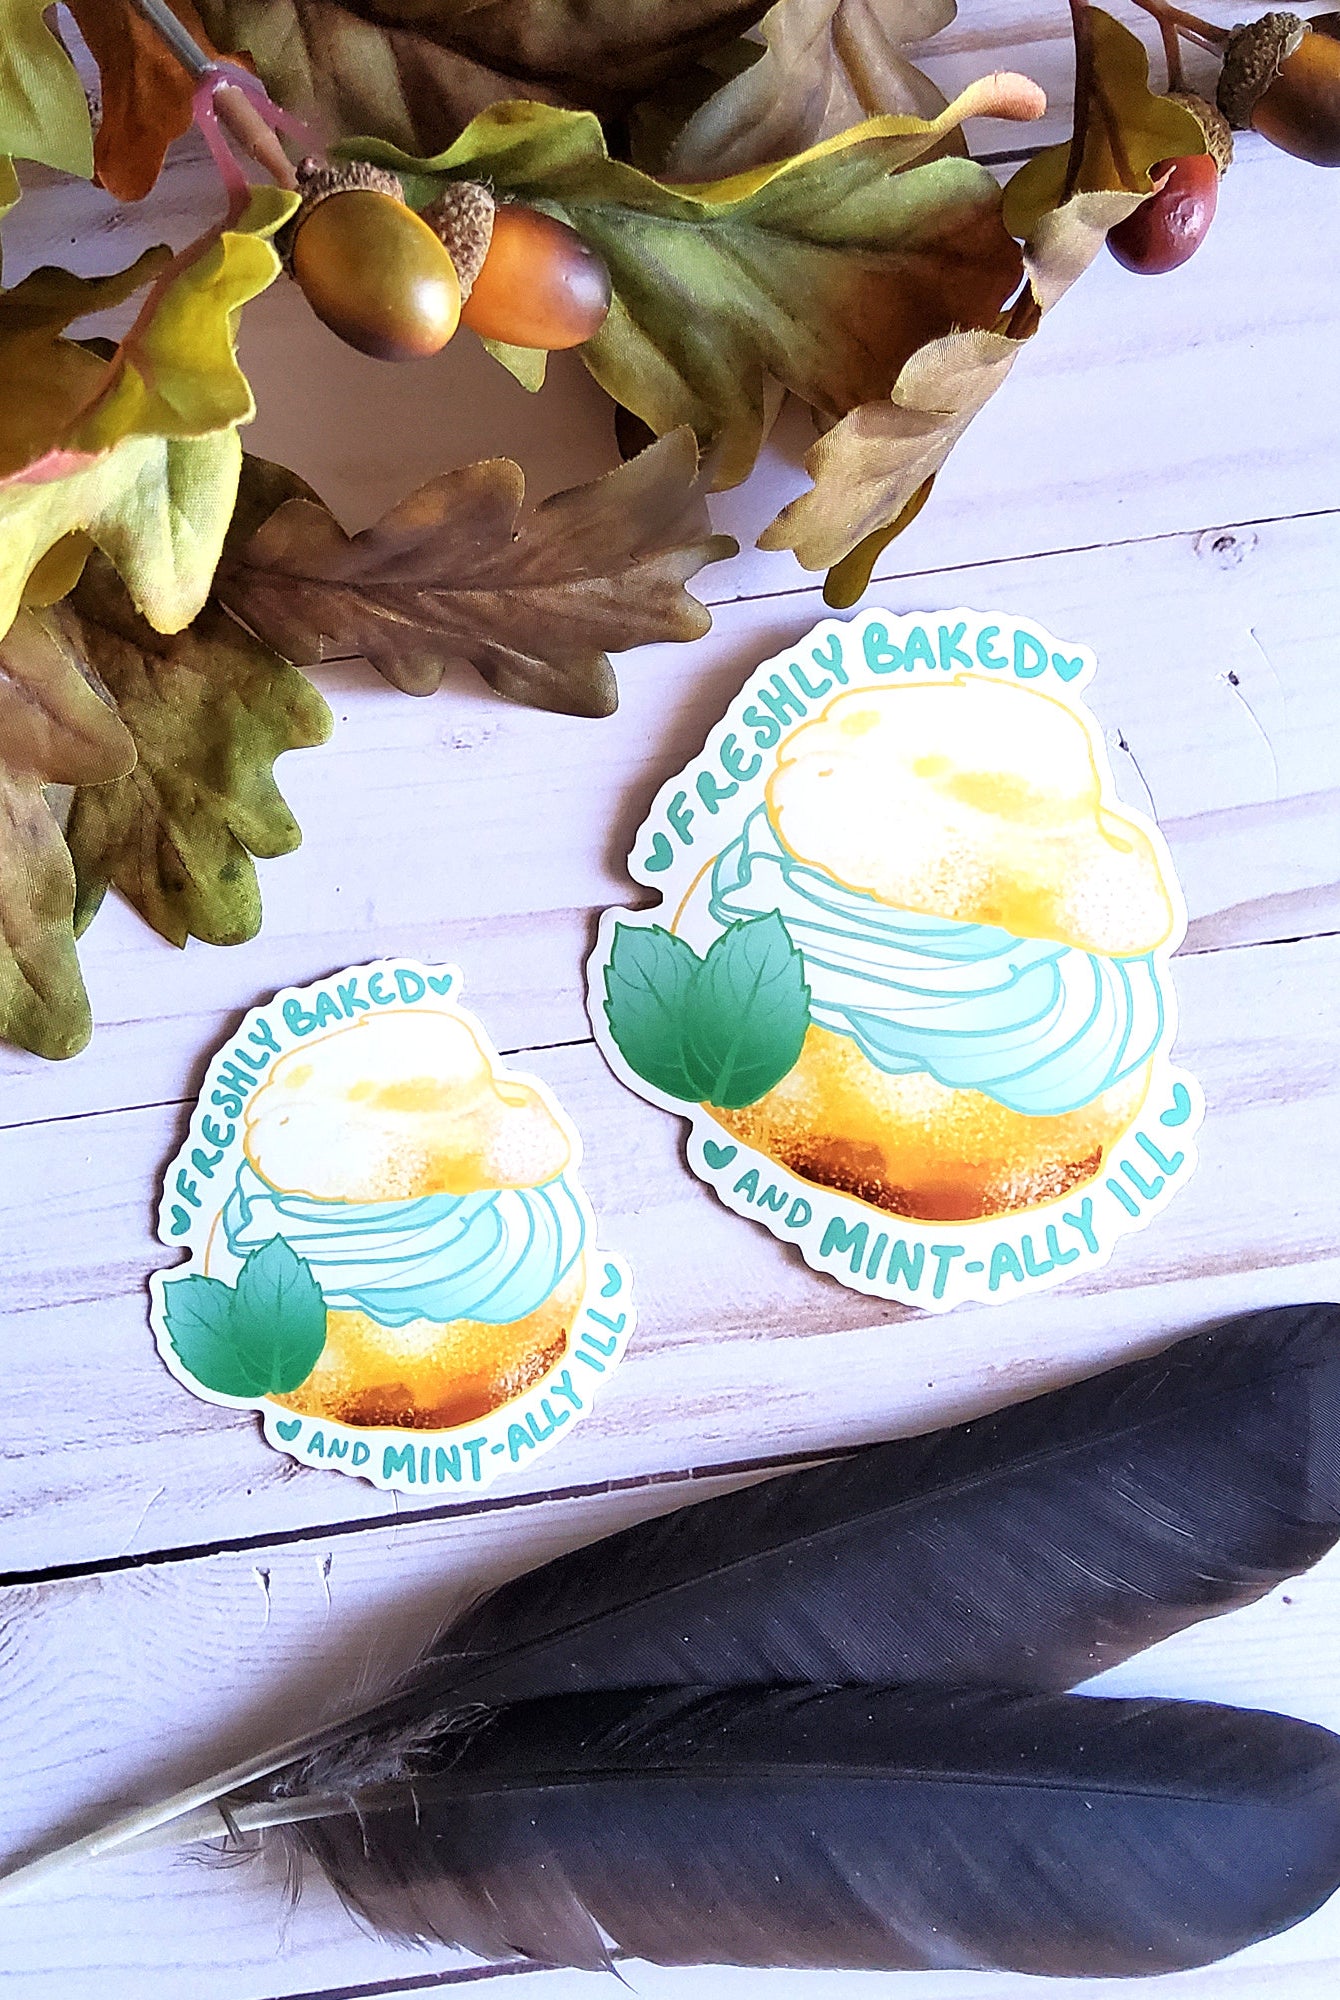 GLOSSY STICKER: Freshly Baked and Mint-ally Ill Creampuff Sticker , Mint-ally Ill Creampuff Sticker , Pastry Sticker , Mint-ally Ill